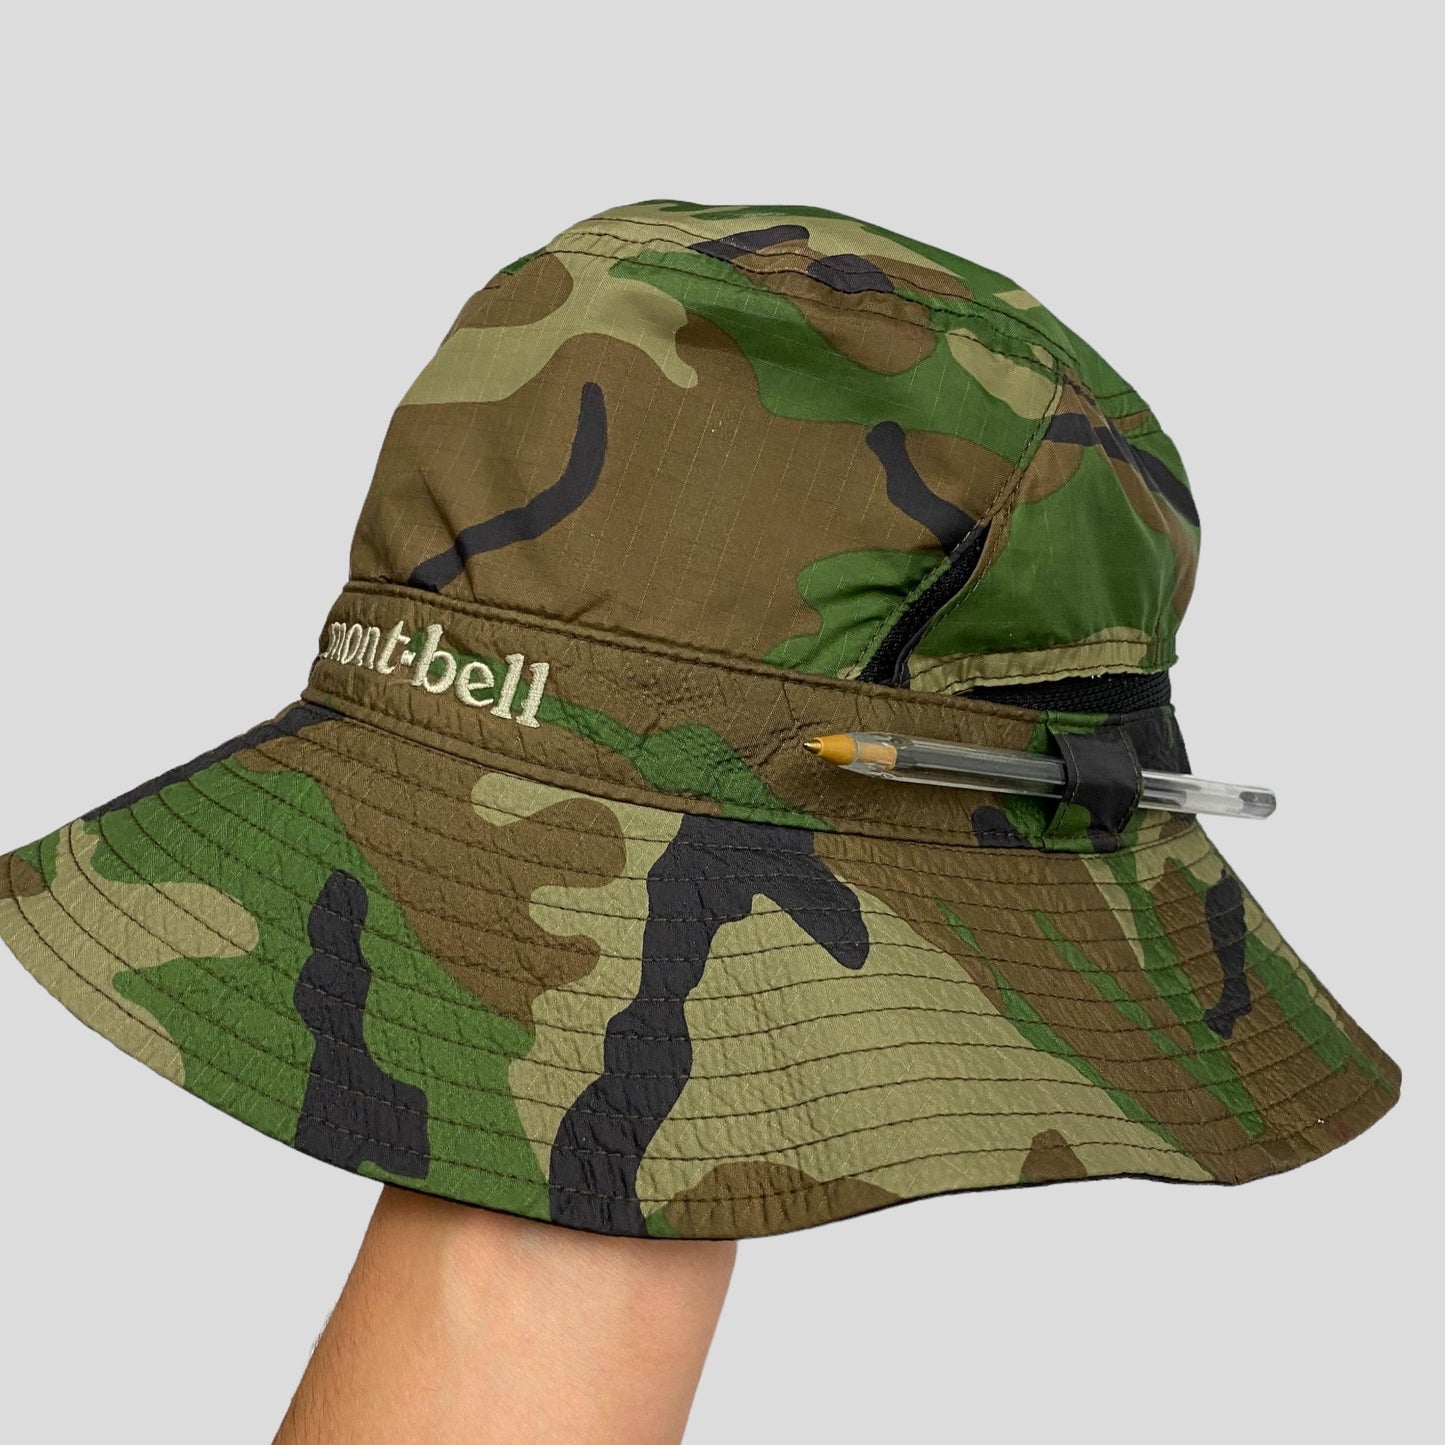 Montbell Camo Ripstop Ventilated Boonie Hat - Known Source